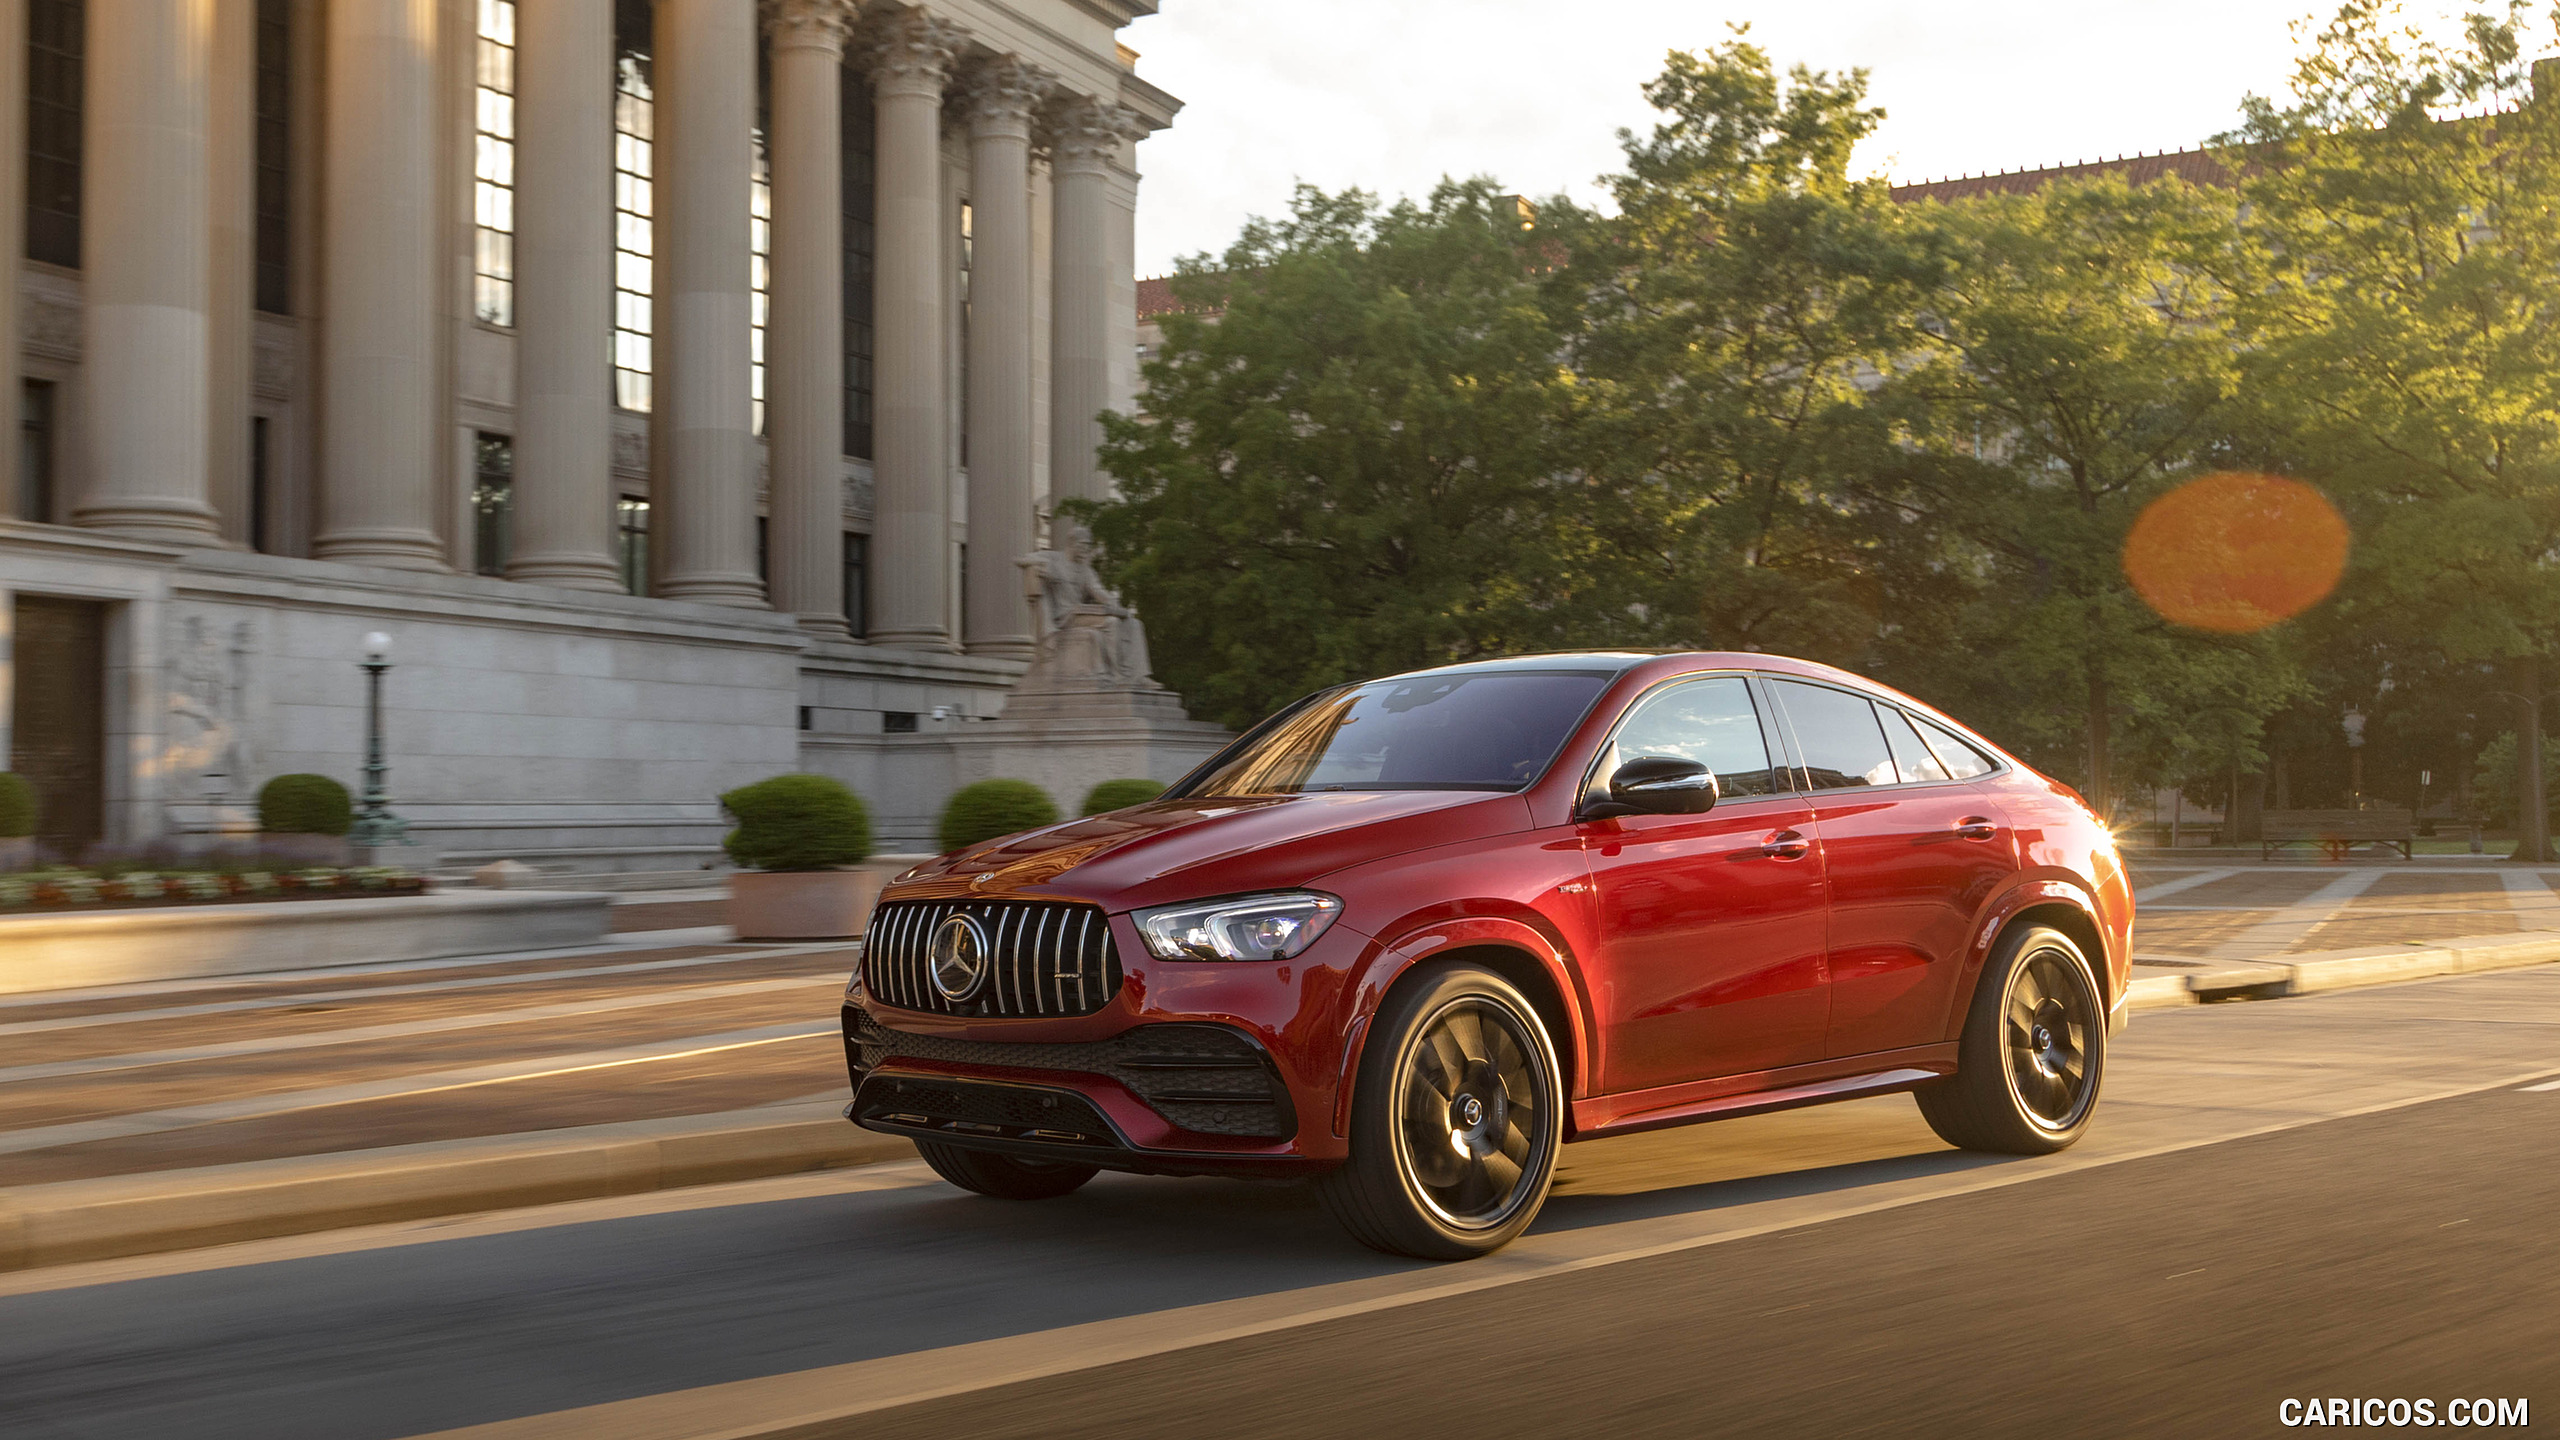 2021 Mercedes-AMG GLE 53 Coupe - Front Three-Quarter, #126 of 178